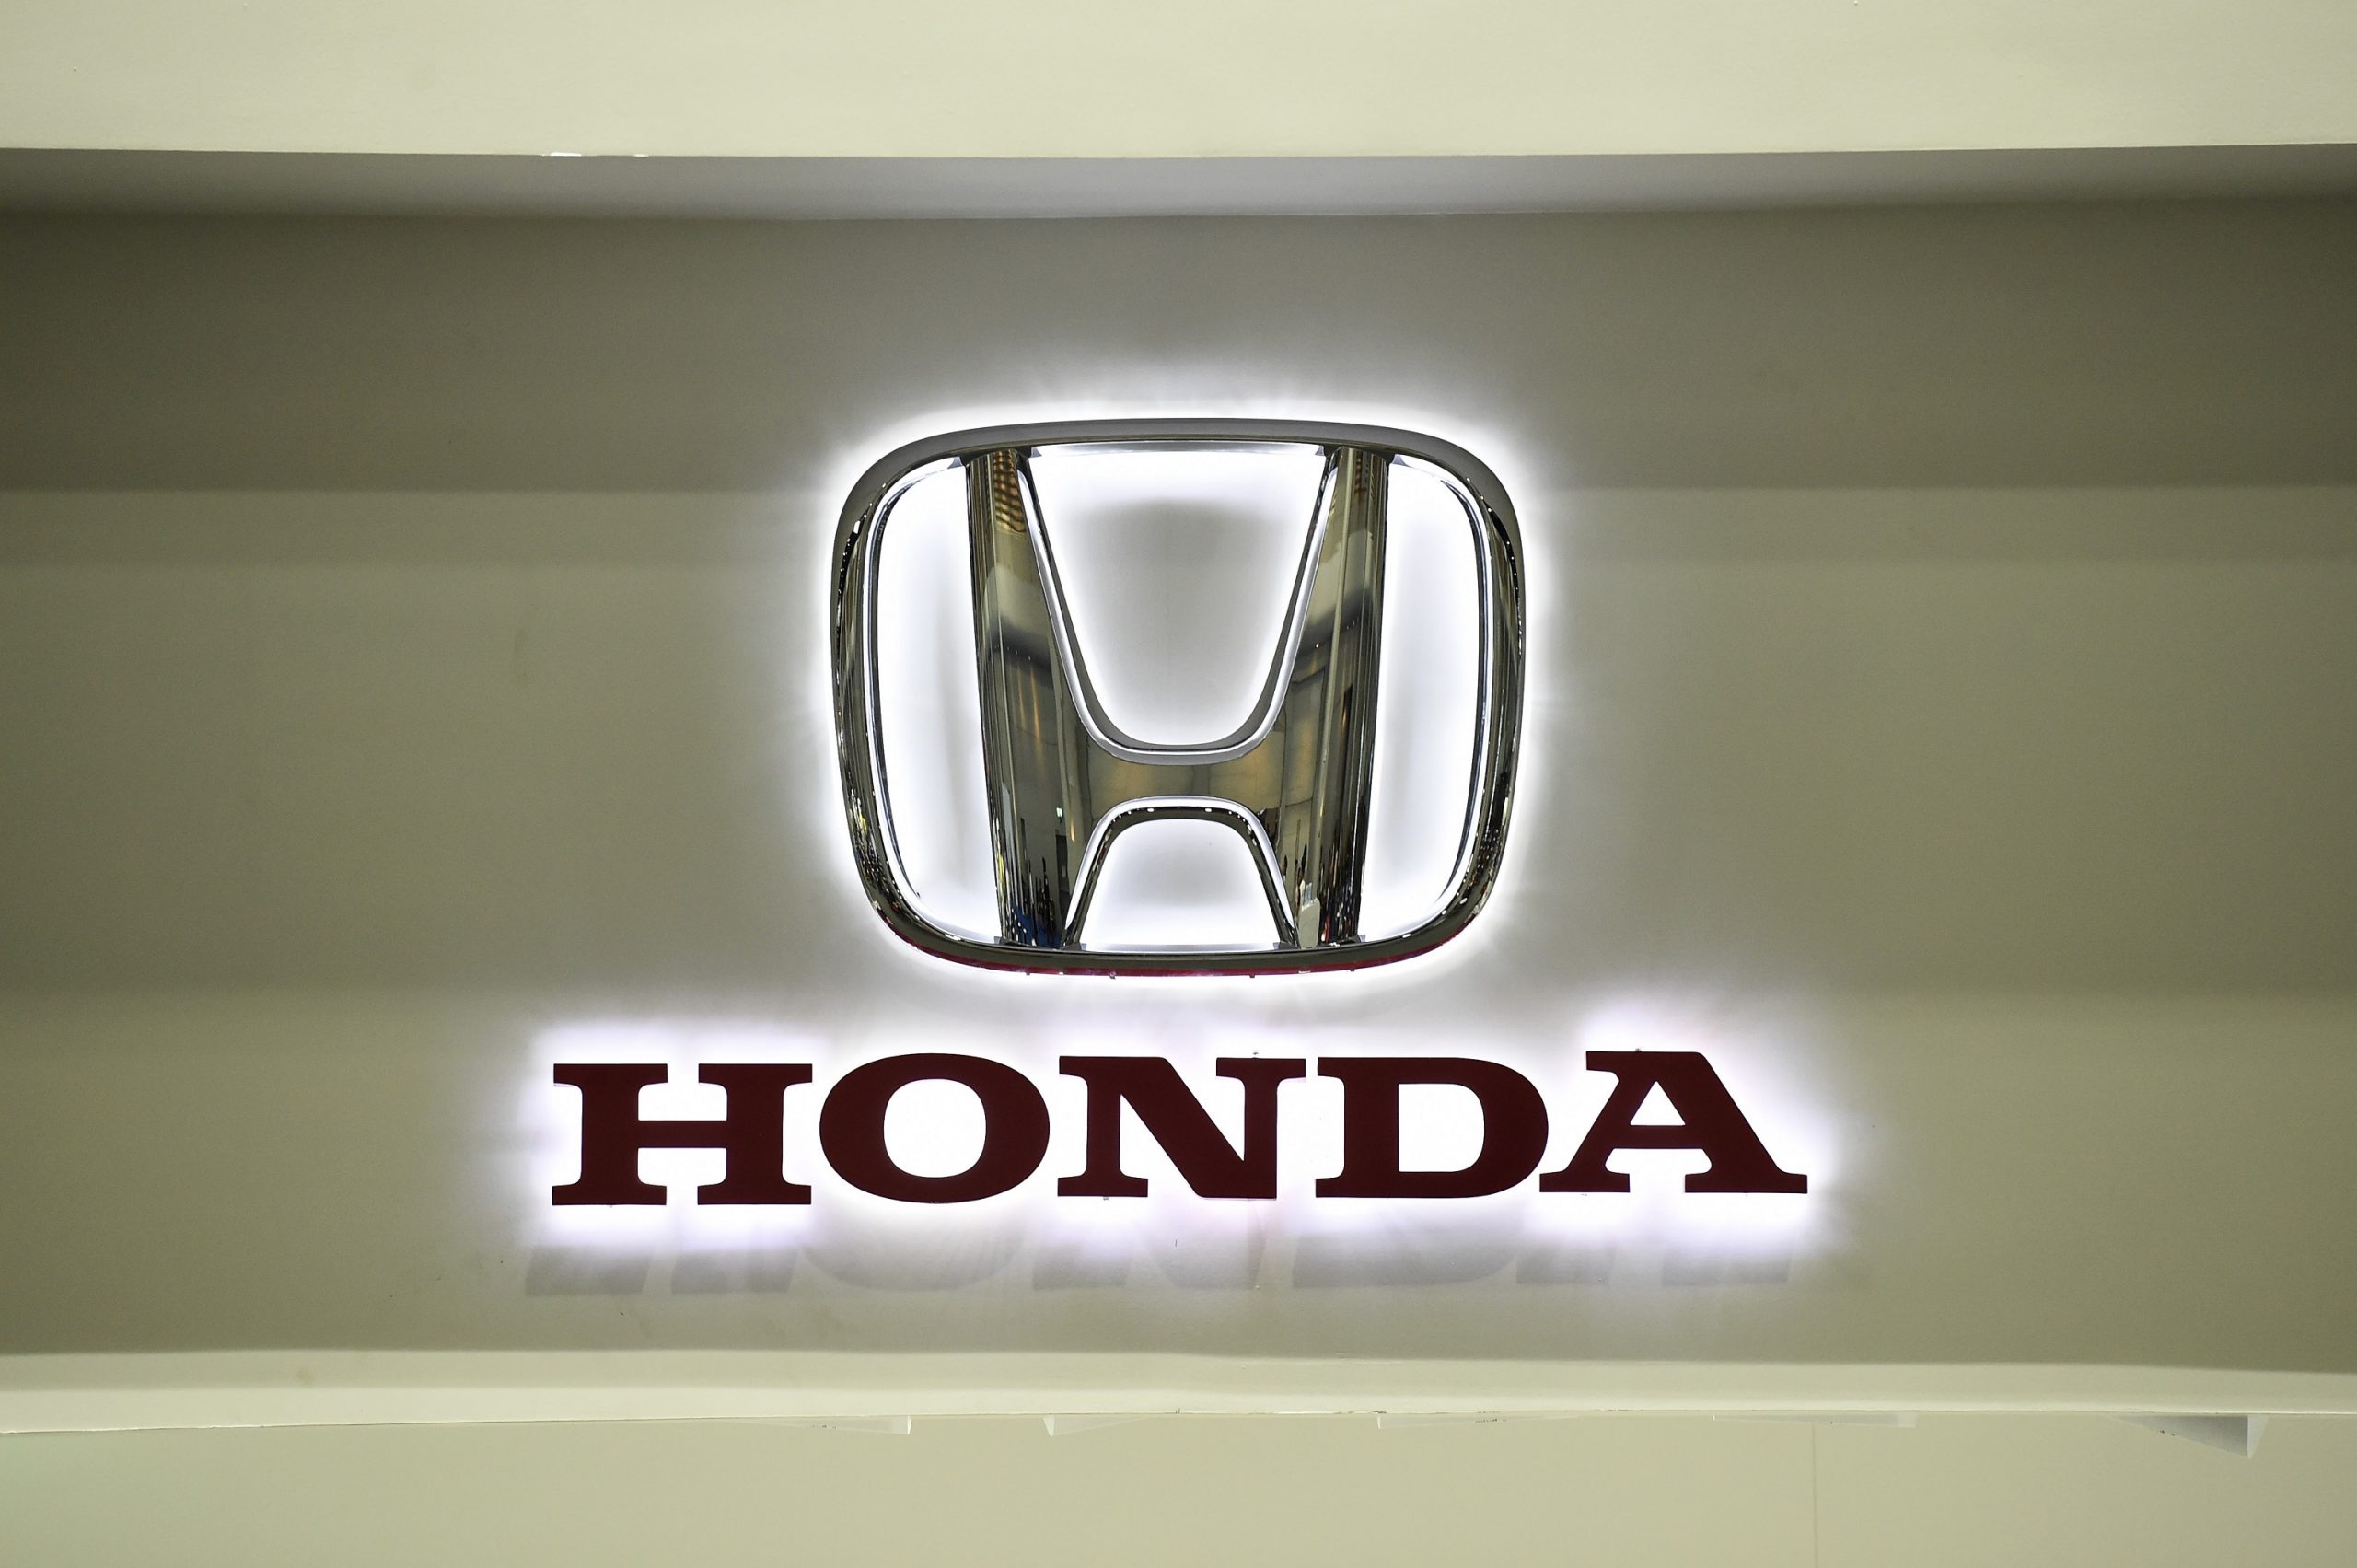 Honda, makers of some of the best new cars, displays their backlit silver logo at an auto show